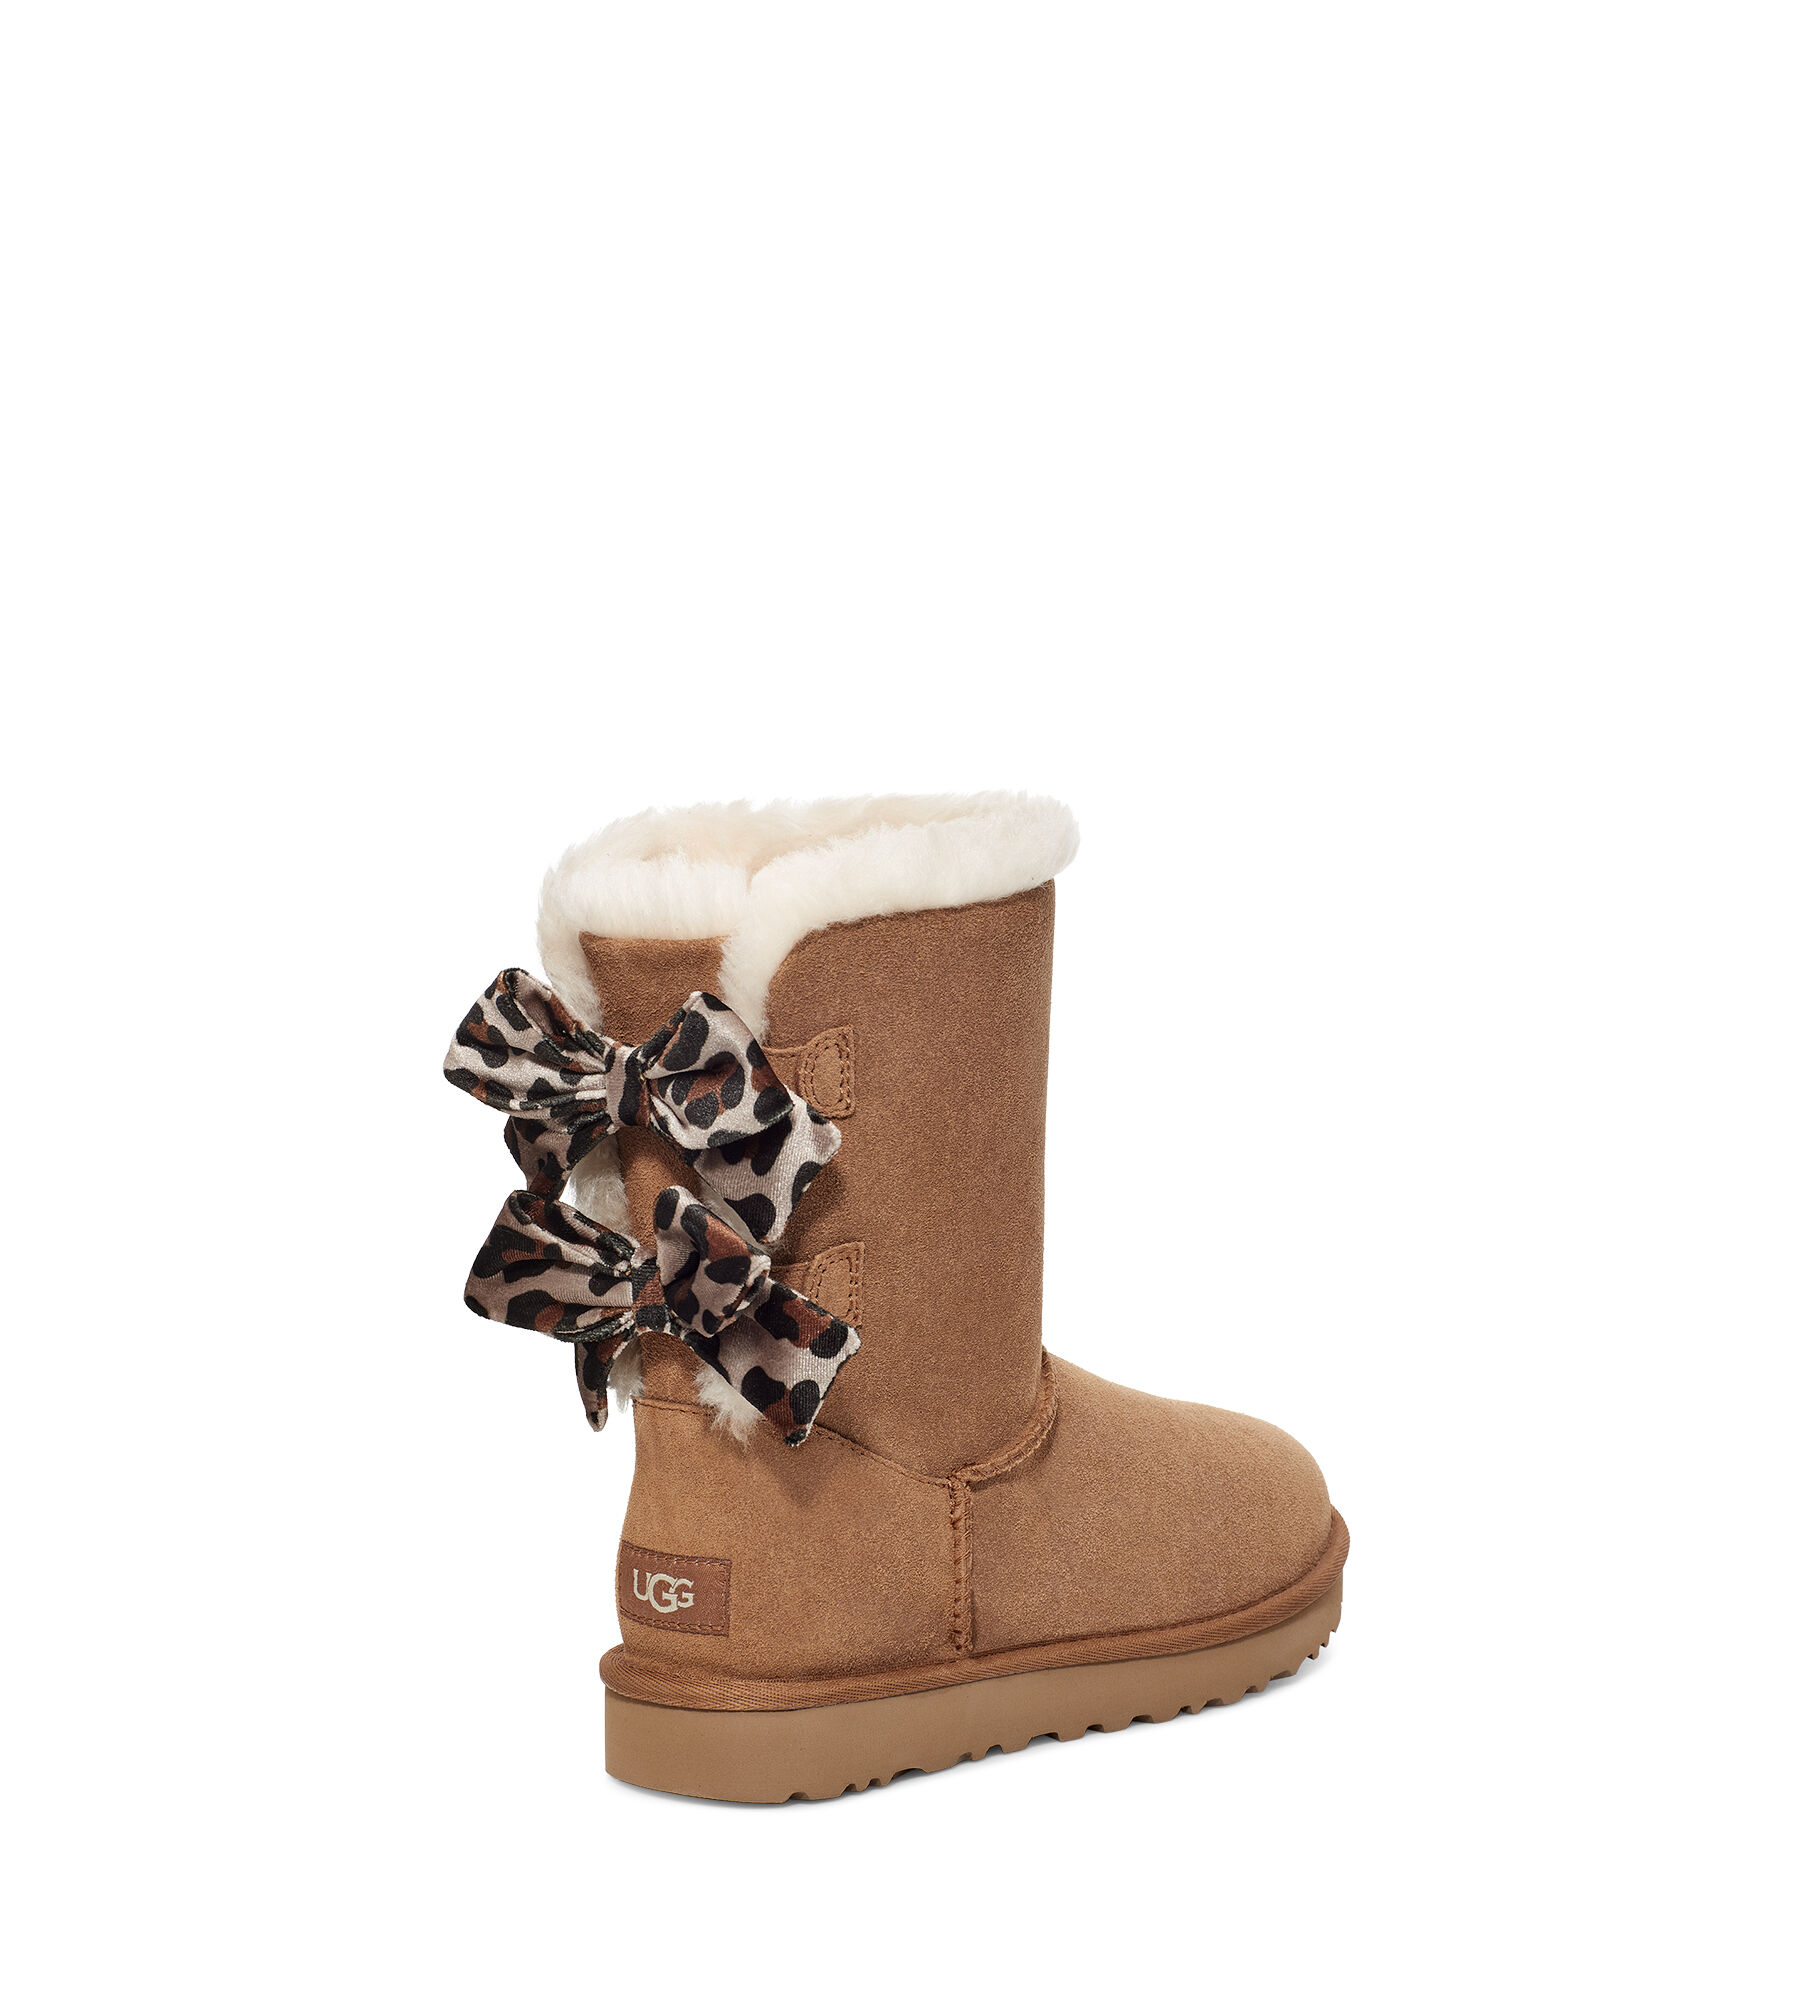 ugg boots in uk sale